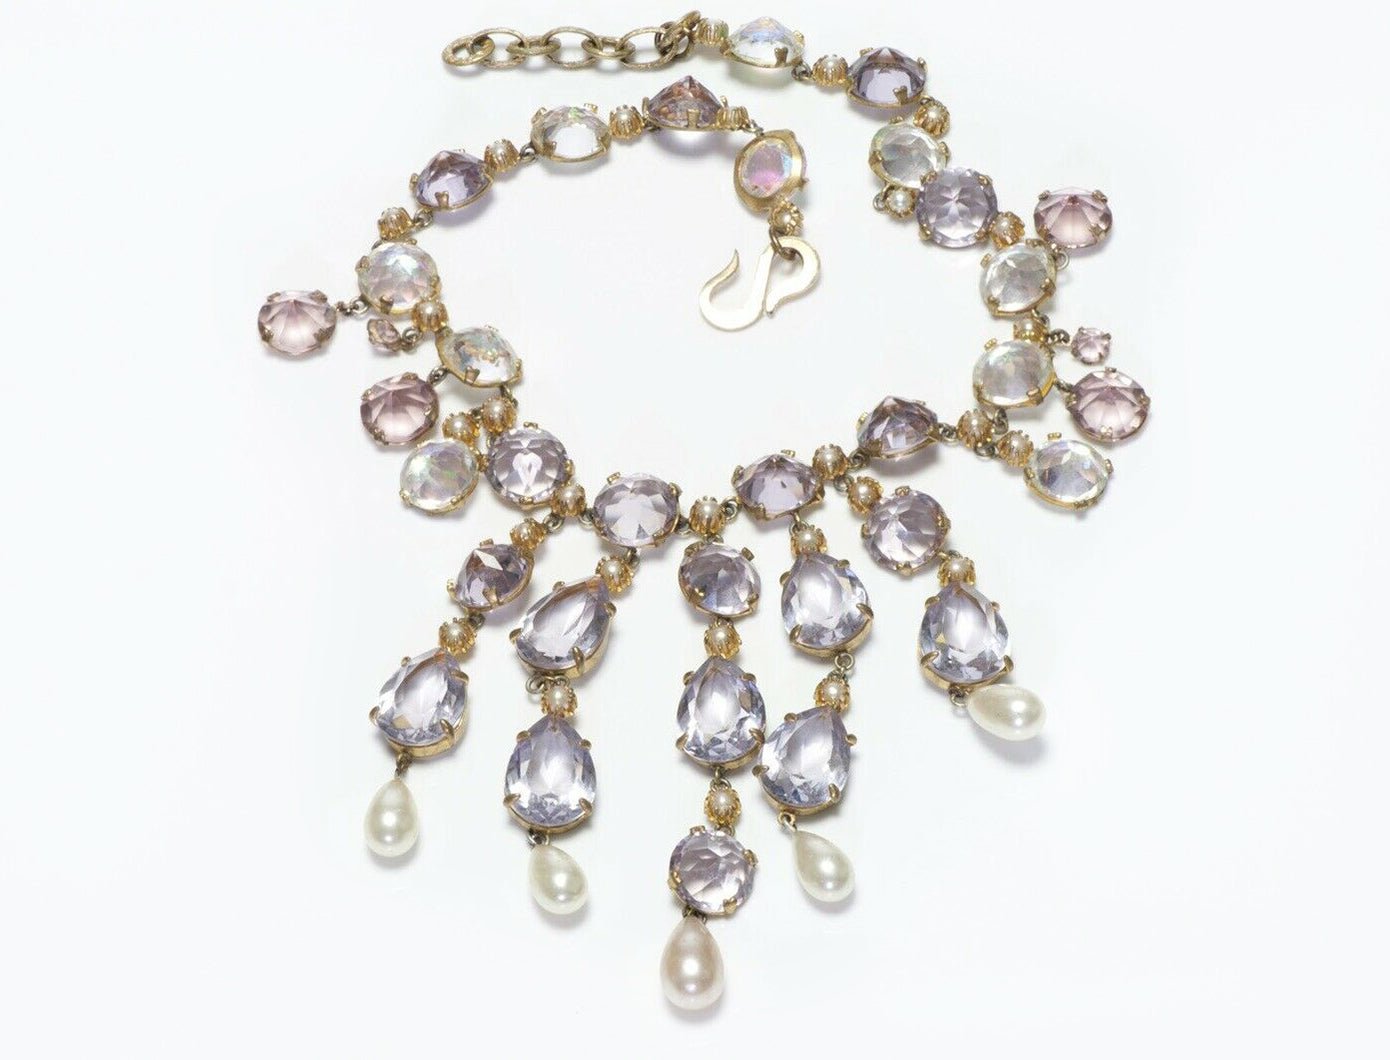 Christian Dior 1950’s by Yves Saint Laurent Purple Crystal Pearl Collar Necklace - DSF Antique Jewelry